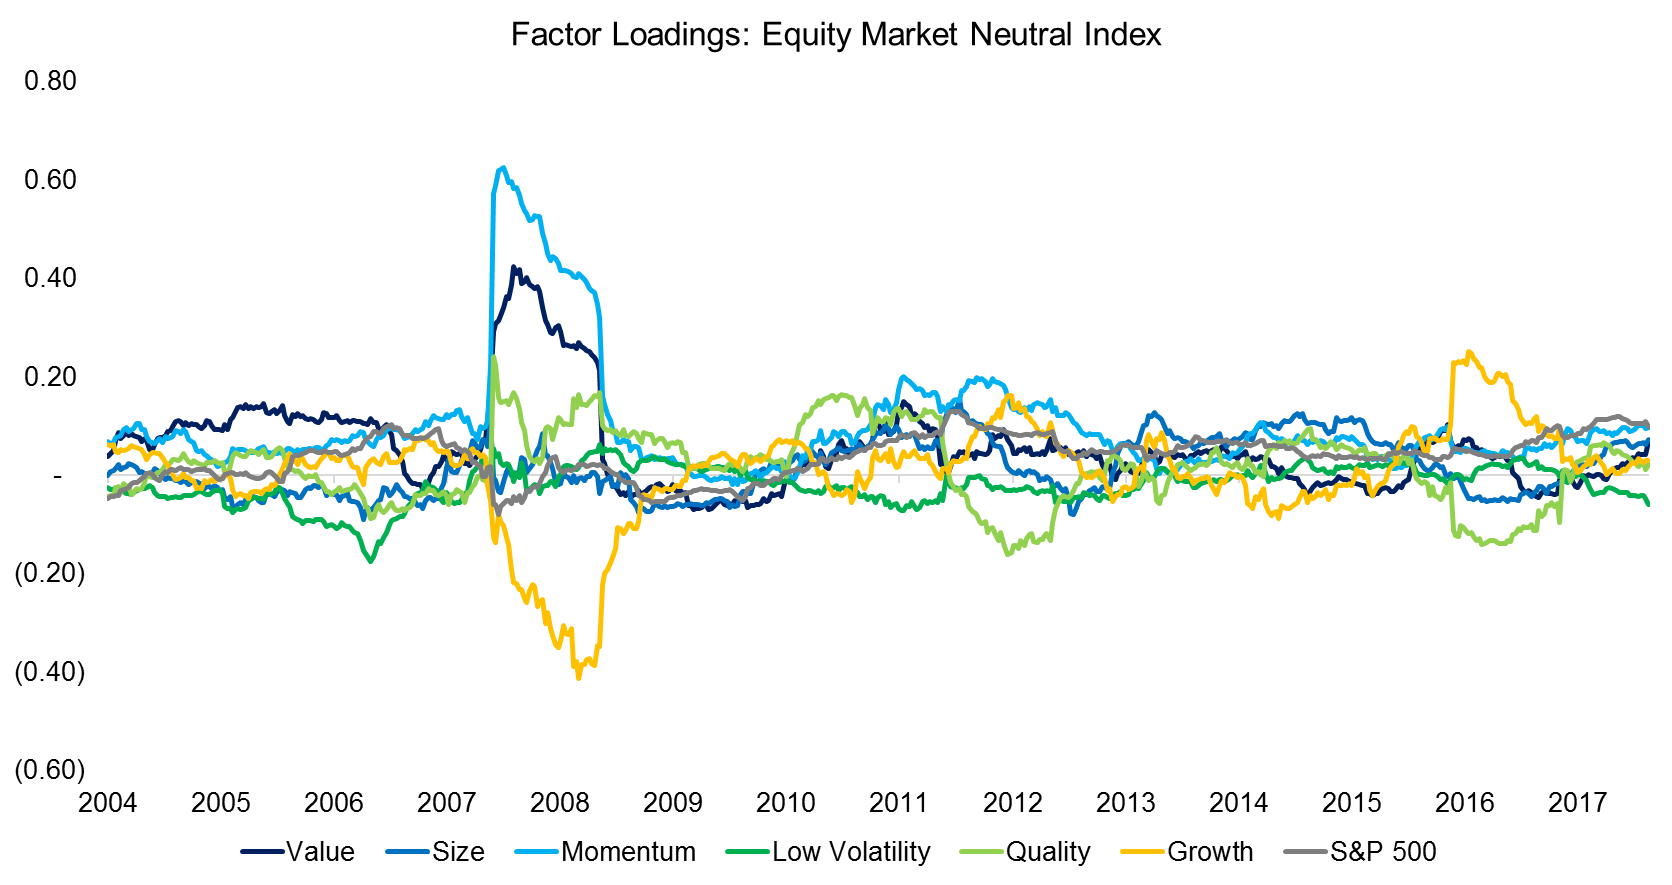 Factor Loadings - Equity Market Neutral Index